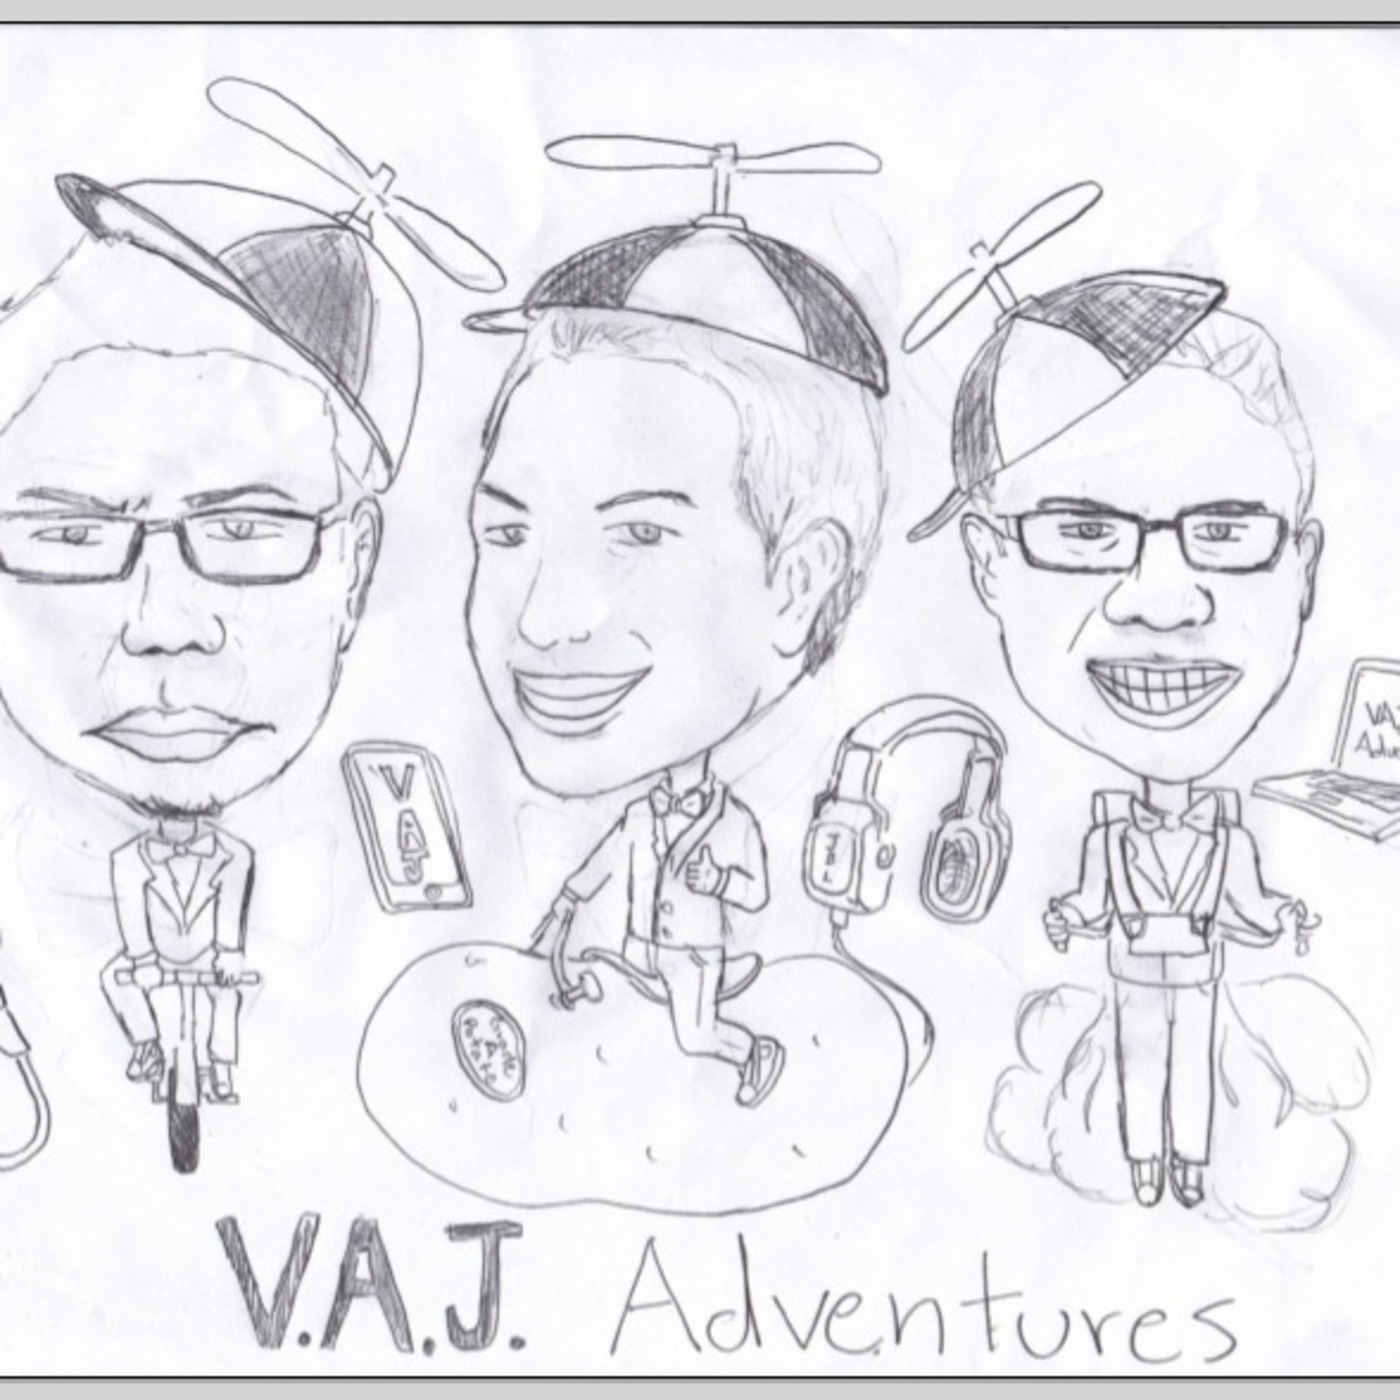 VAJ Ep.2-Are you still there?